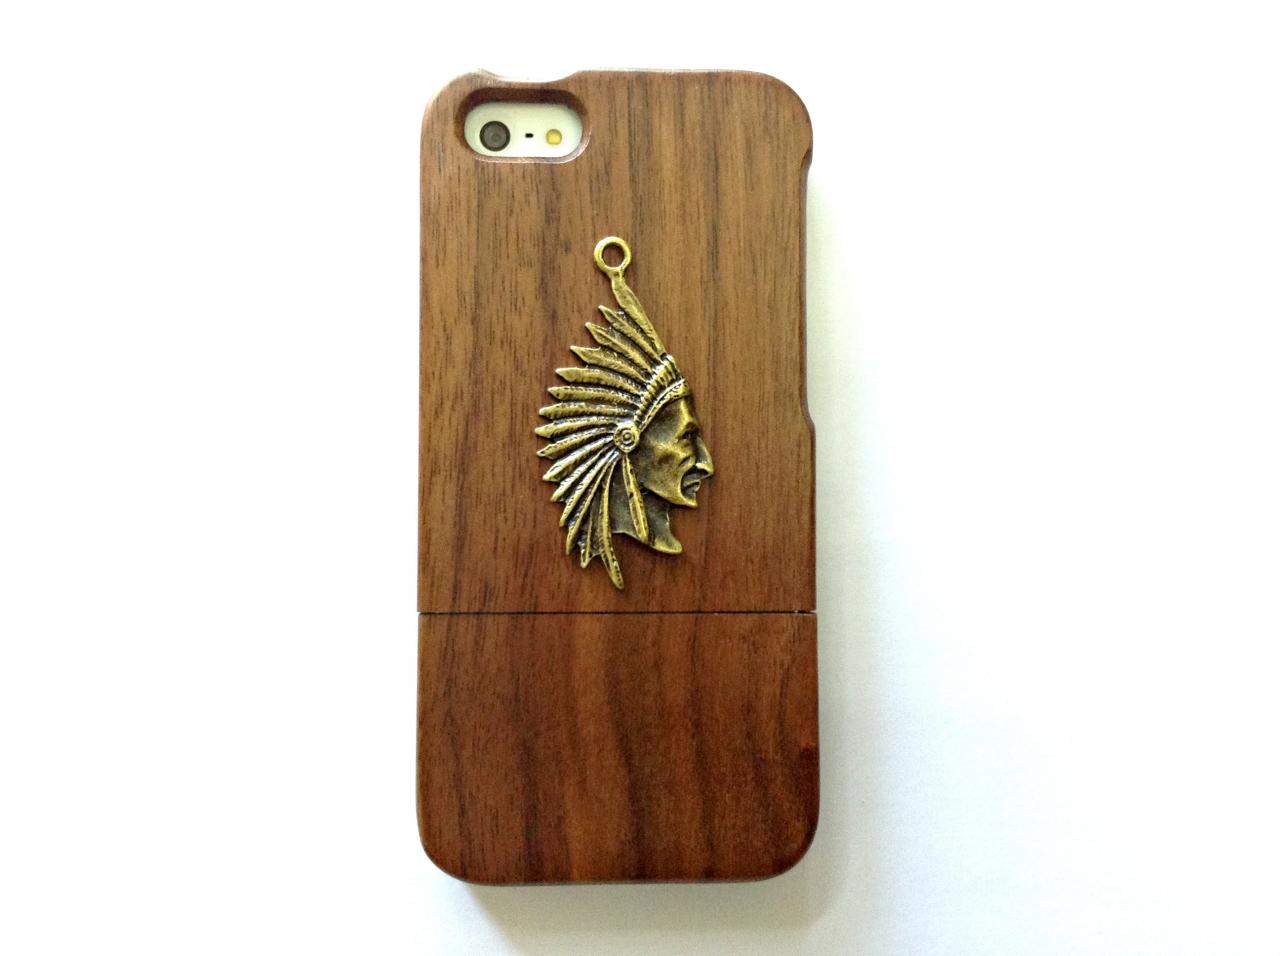 Indian Iphone 6 6s 4.7 Wood Case, Vintage Iphone 6 6s Plus Wood Case, Iphone Se, 5c, 5, 5s Wood Case, Samsung Galaxy S4, S5, S6, S6 Edge, S7, S7